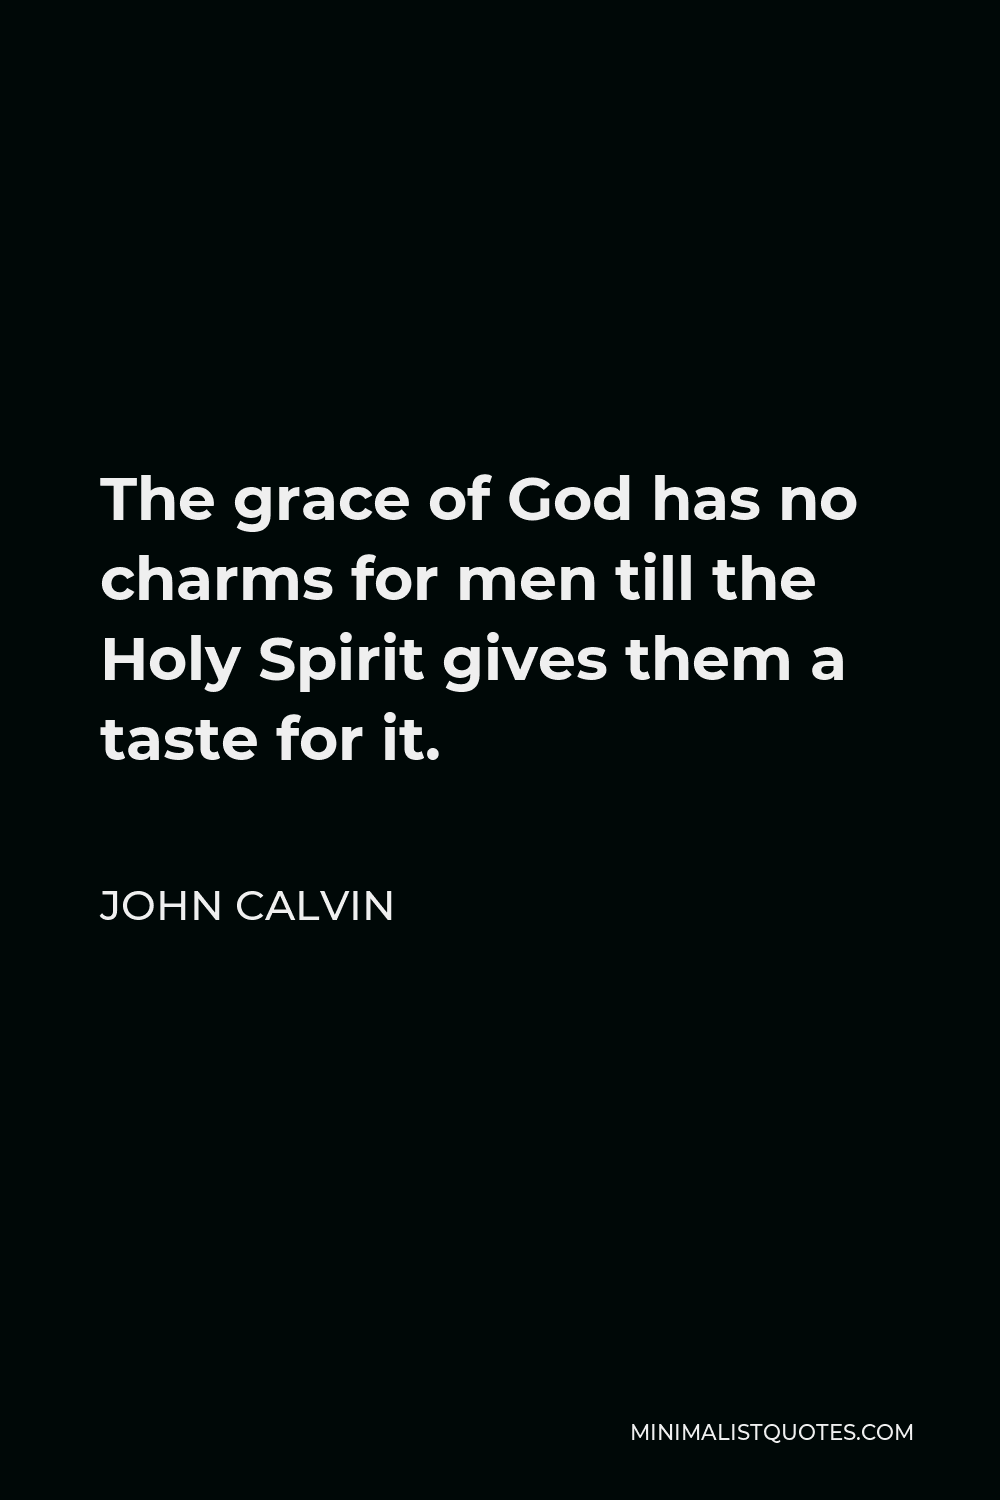 John Calvin Quote - The grace of God has no charms for men till the Holy Spirit gives them a taste for it.